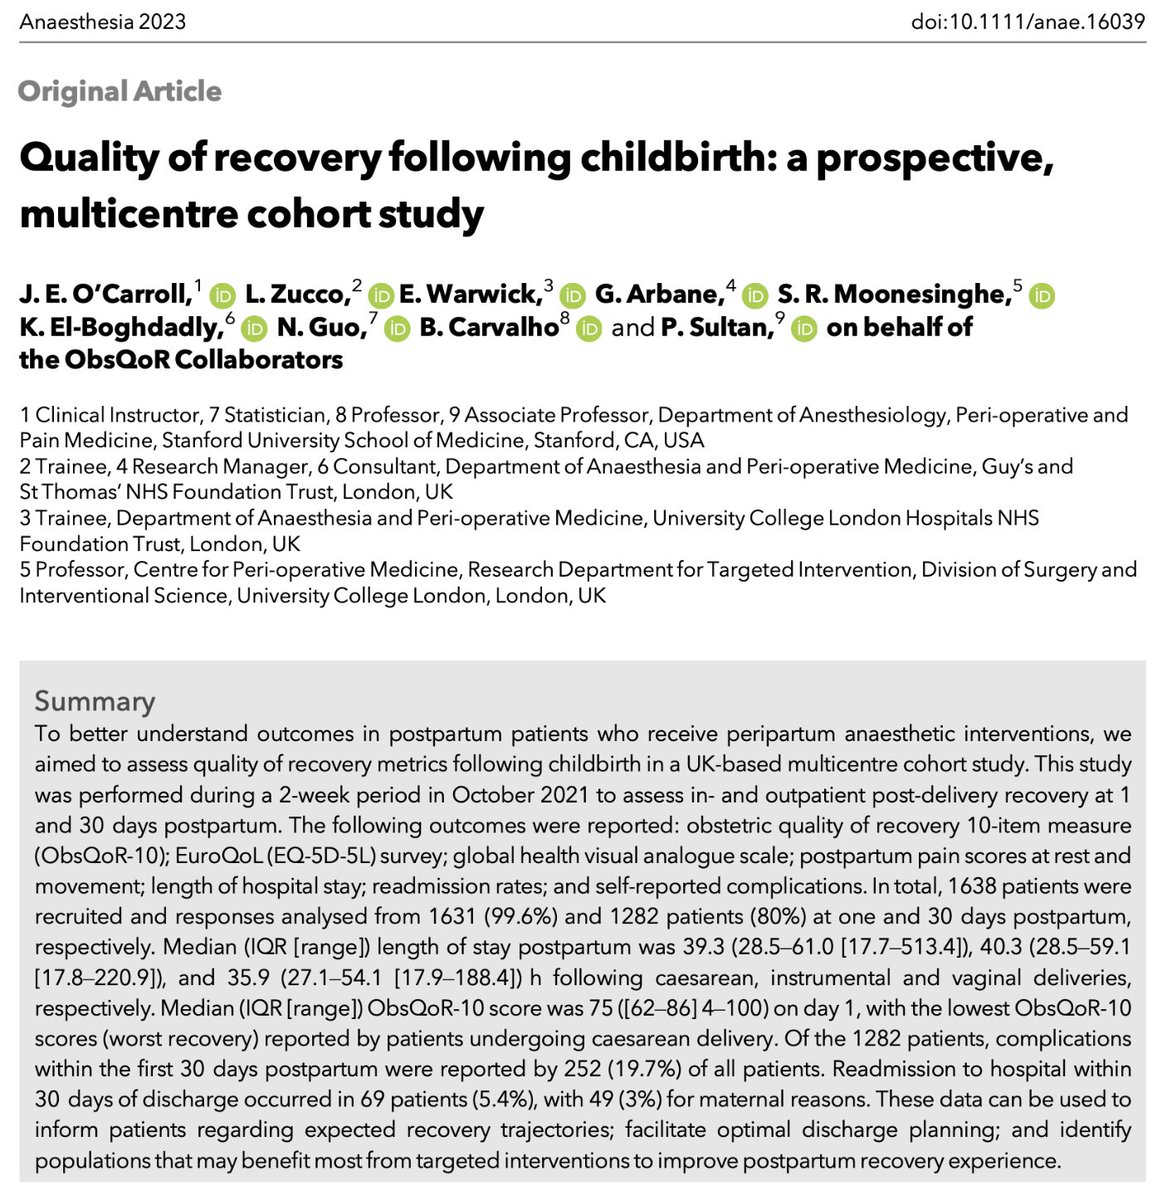 🔓Quality of recovery following childbirth: a prospective, multicentre cohort study. @Jamesocarroll @lianazucco @eleanor_warwick @rmoonesinghe @elboghdadly @CarvalB @PervezSultanMD @ObsQoR Now #FreeForAWeek to read and download! 🔗…-publications.onlinelibrary.wiley.com/doi/10.1111/an…